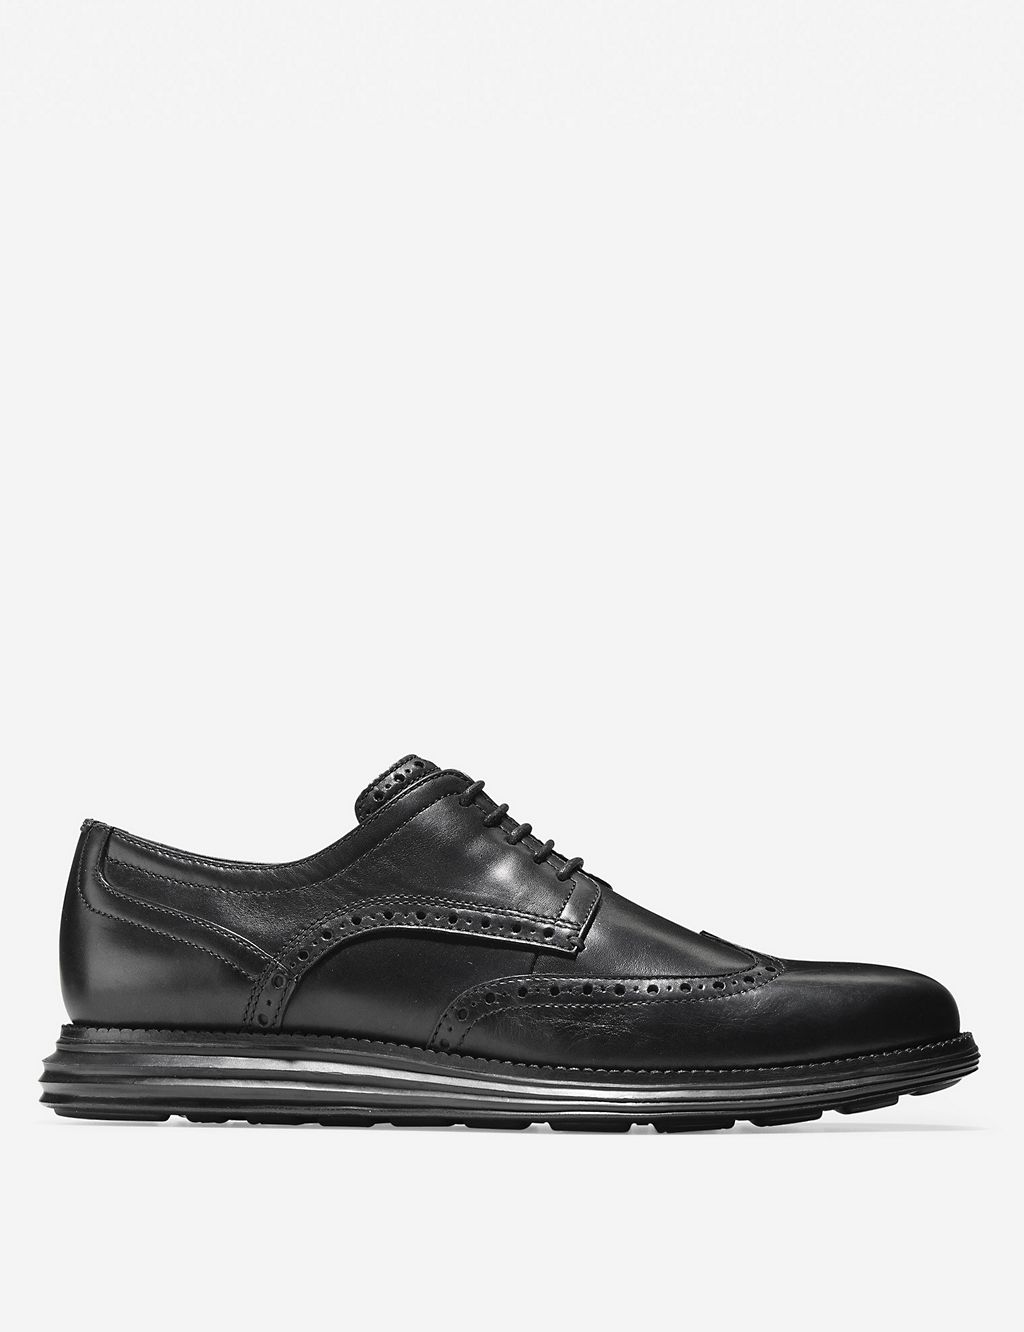 Originalgrand Wide Fit Leather Oxford Shoes 3 of 5